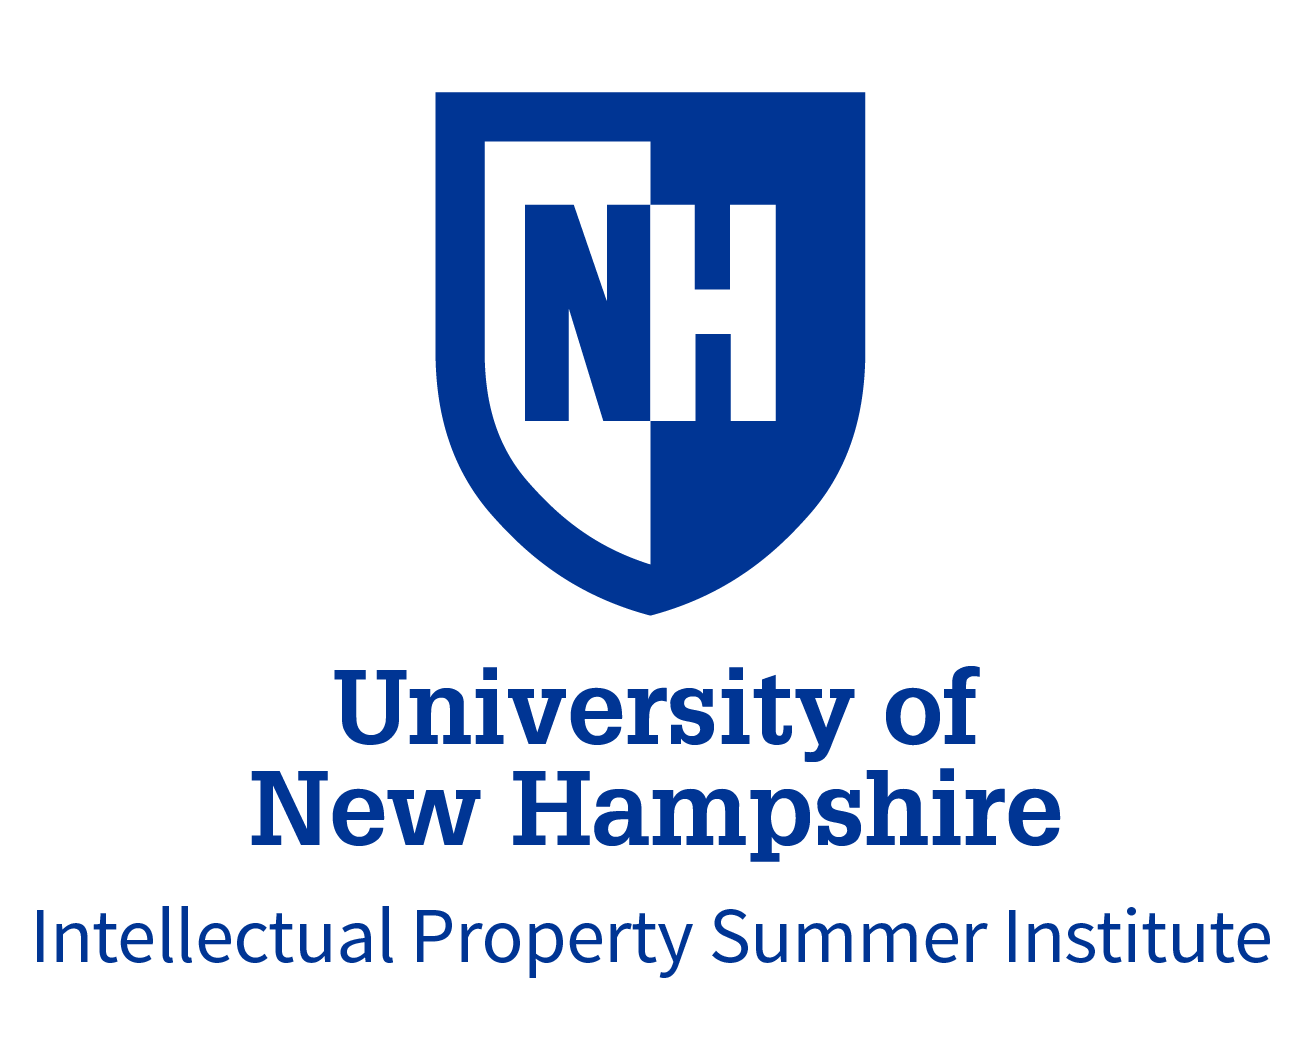 University of New Hampshire - Intellectual Property Summer Institute